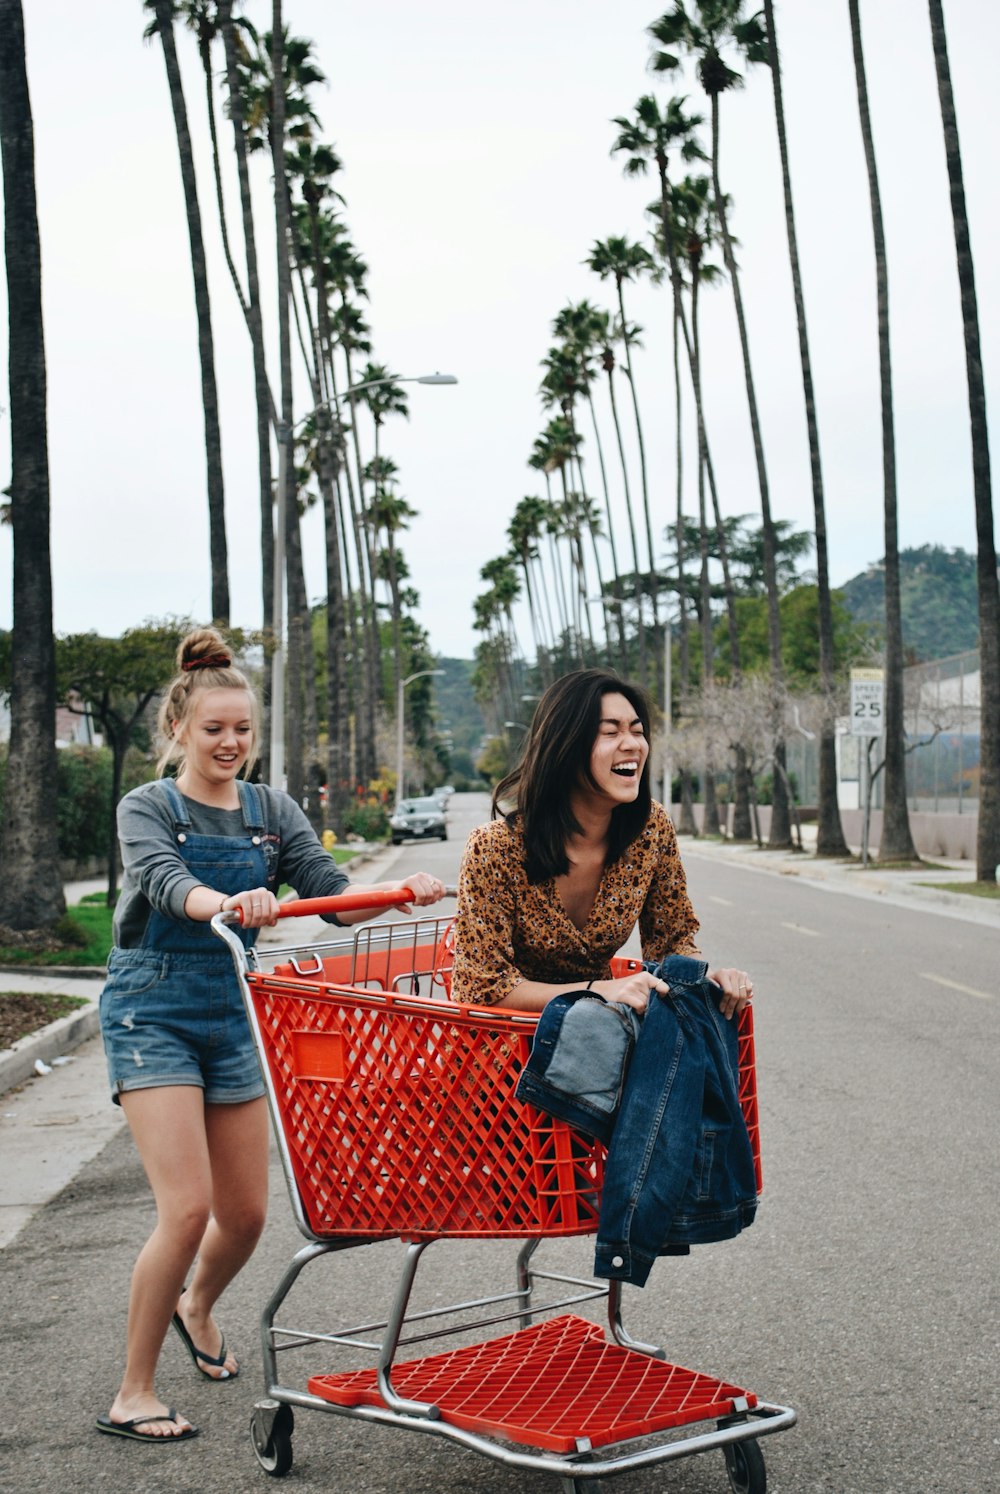 woman riding shopping cart with another woman pushing it in the middle of road